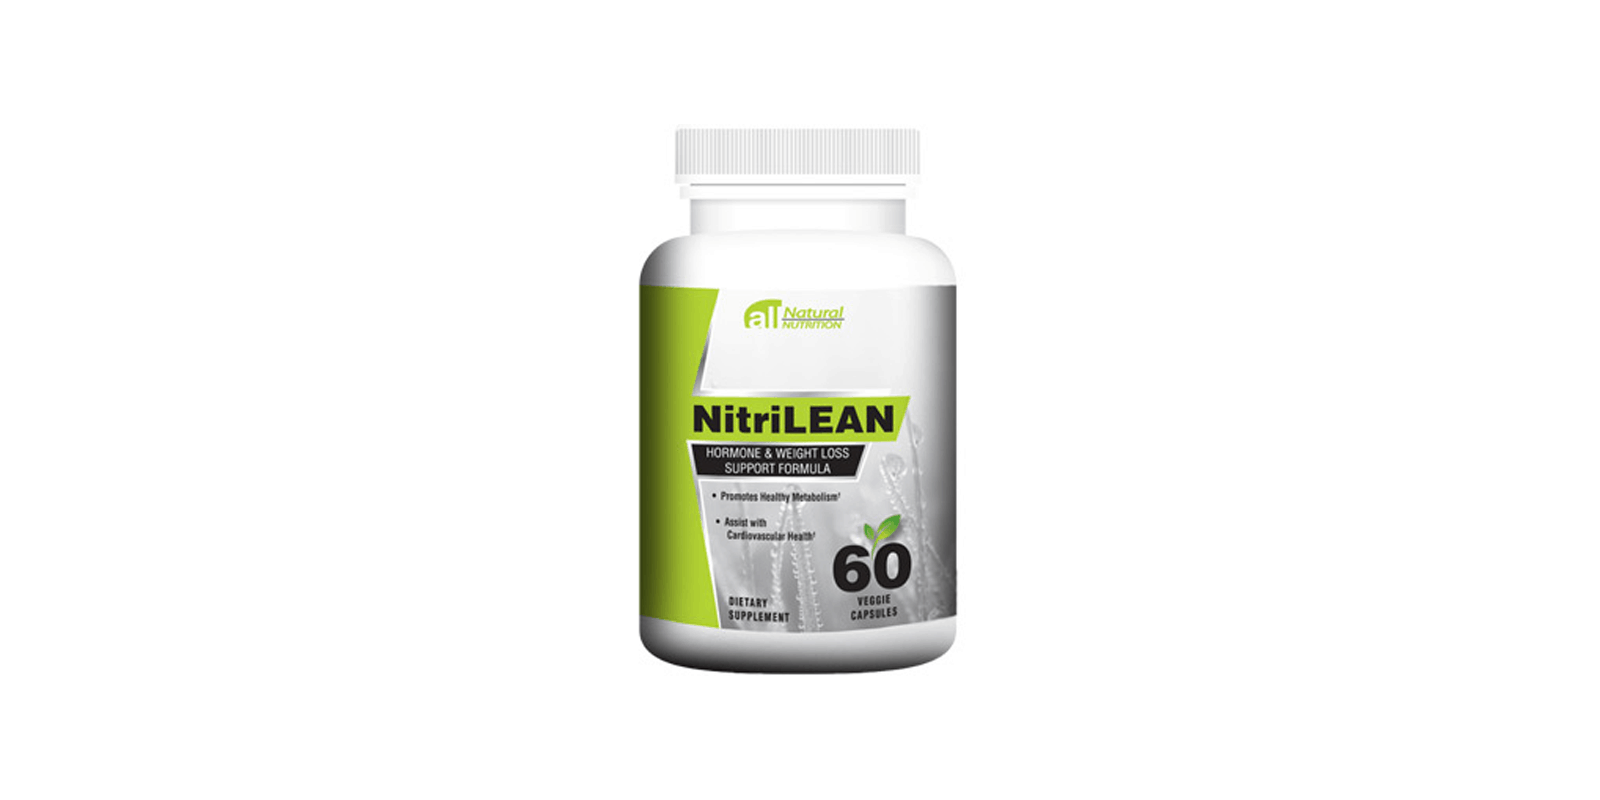 NitriLEAN Reviews: What Customers Have To Say About NitriLEAN